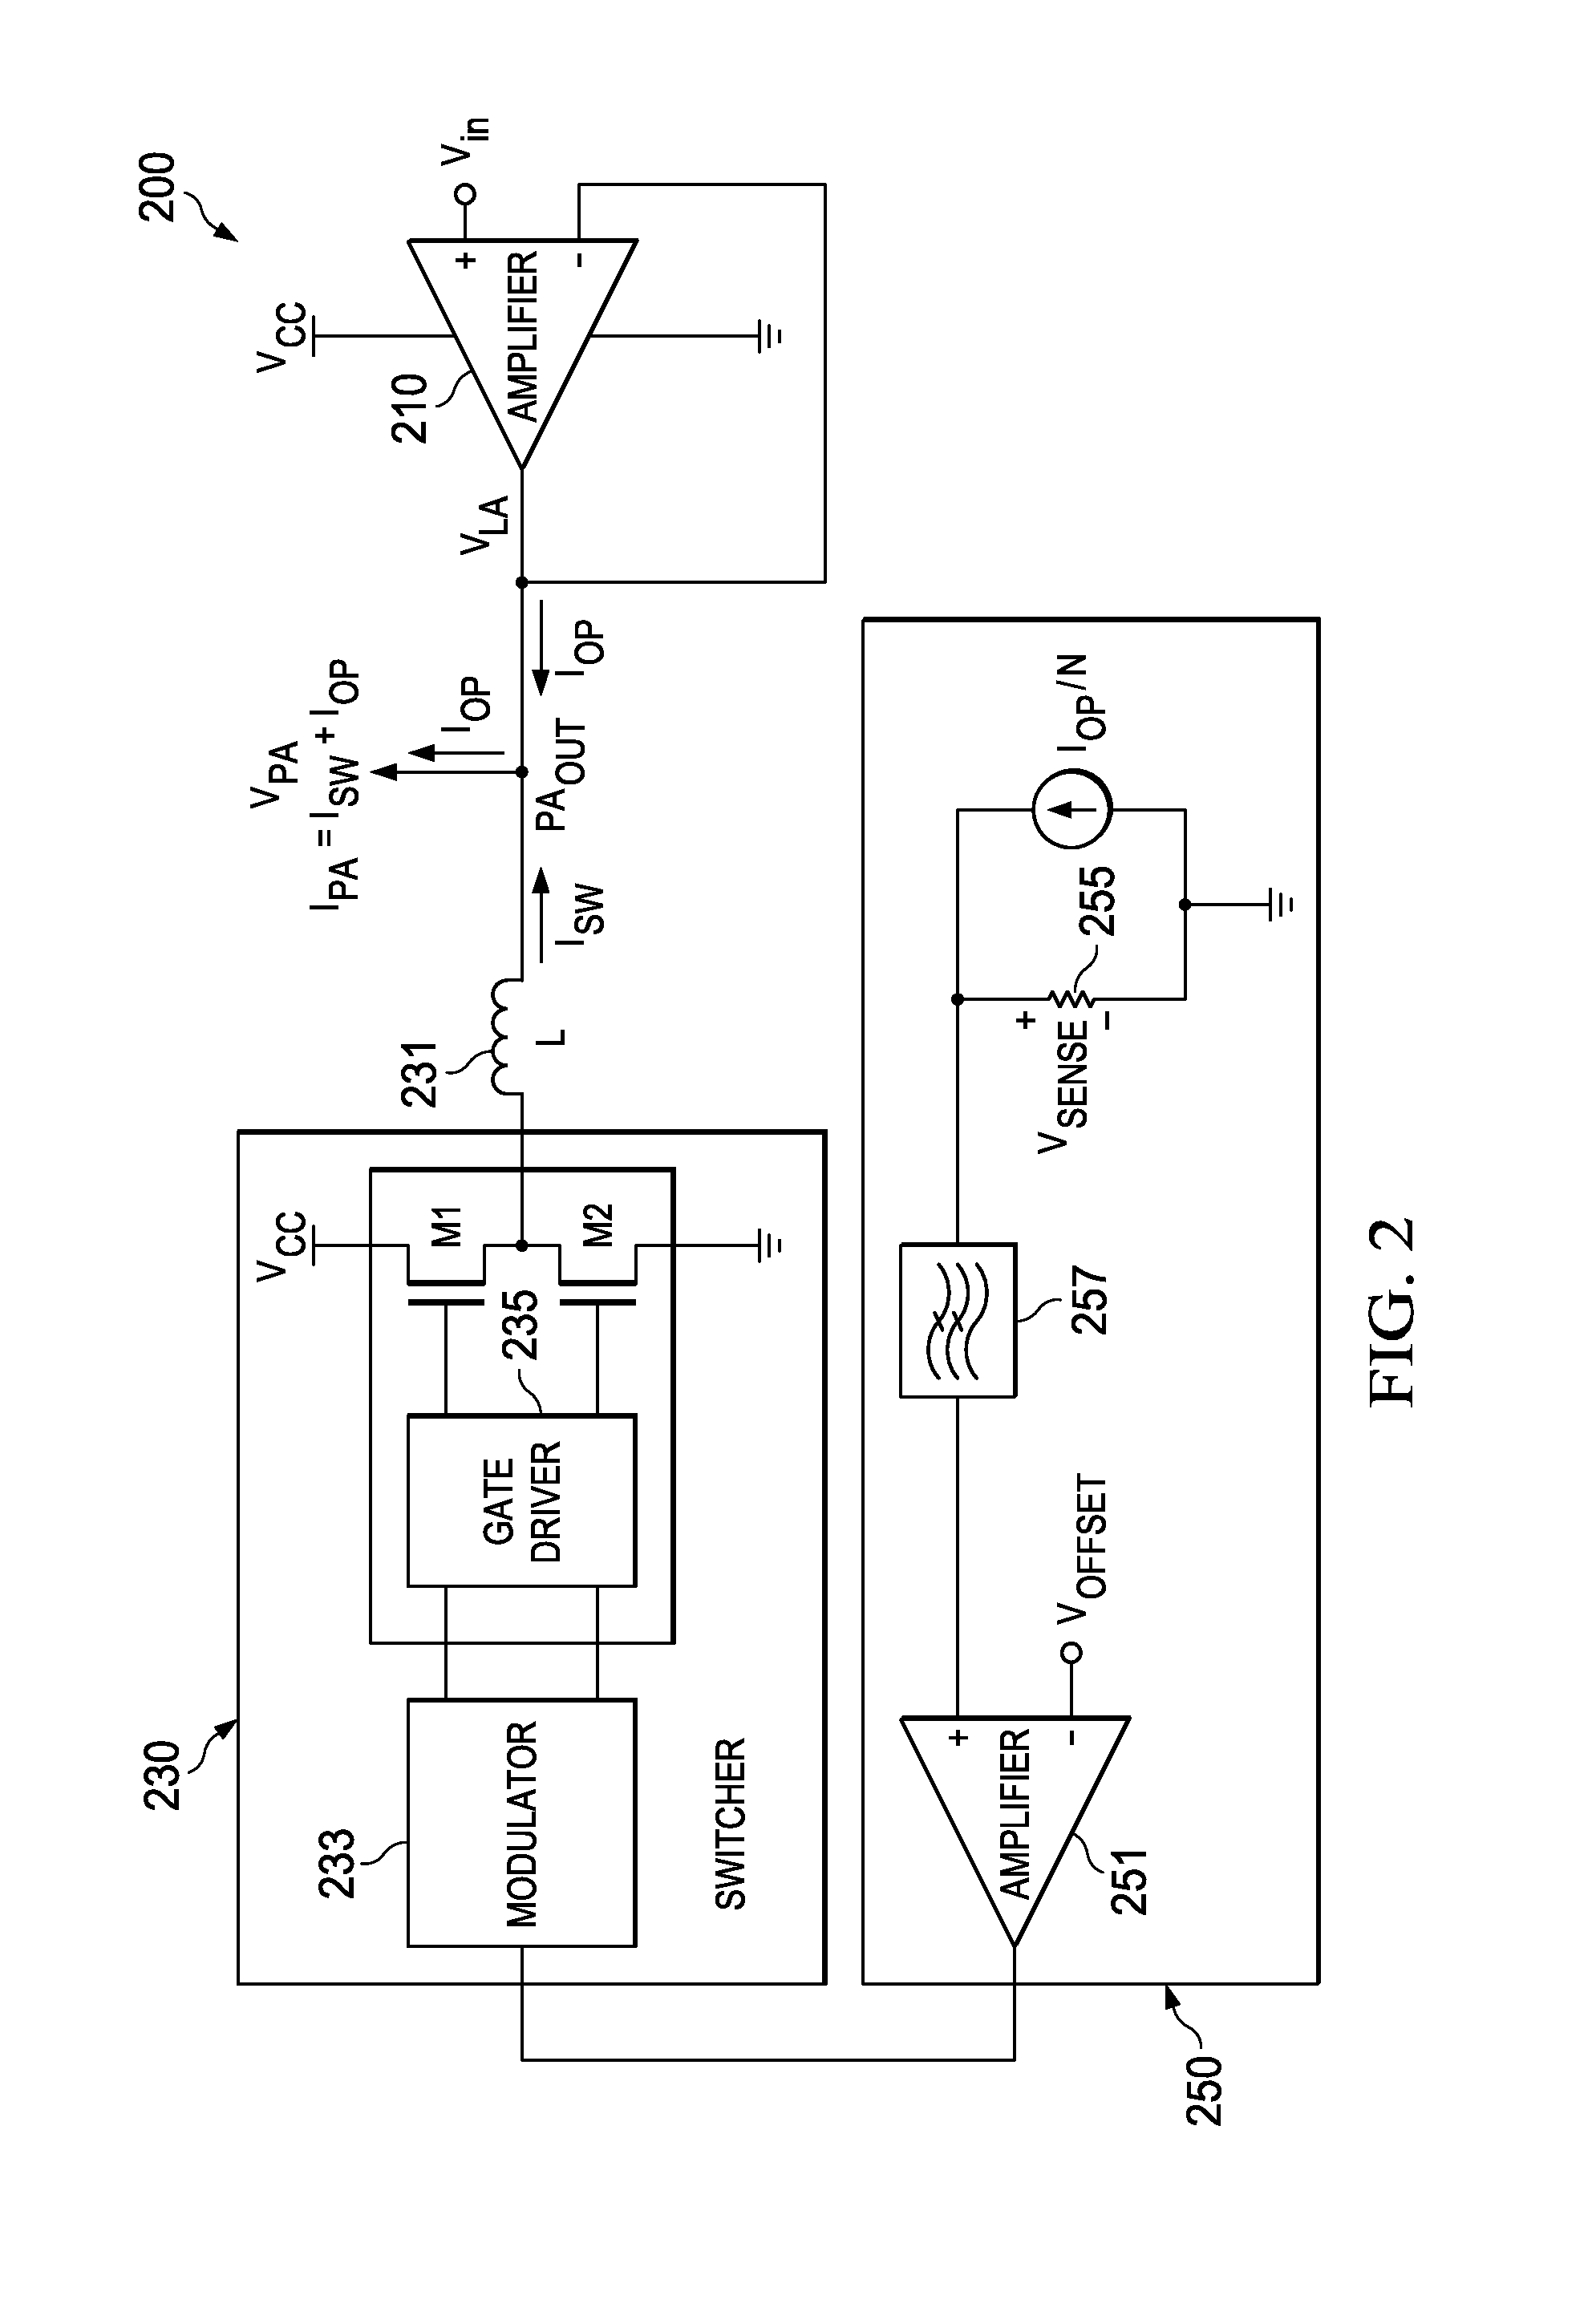 Switched mode assisted linear regulator with seamless transition between power tracking configurations